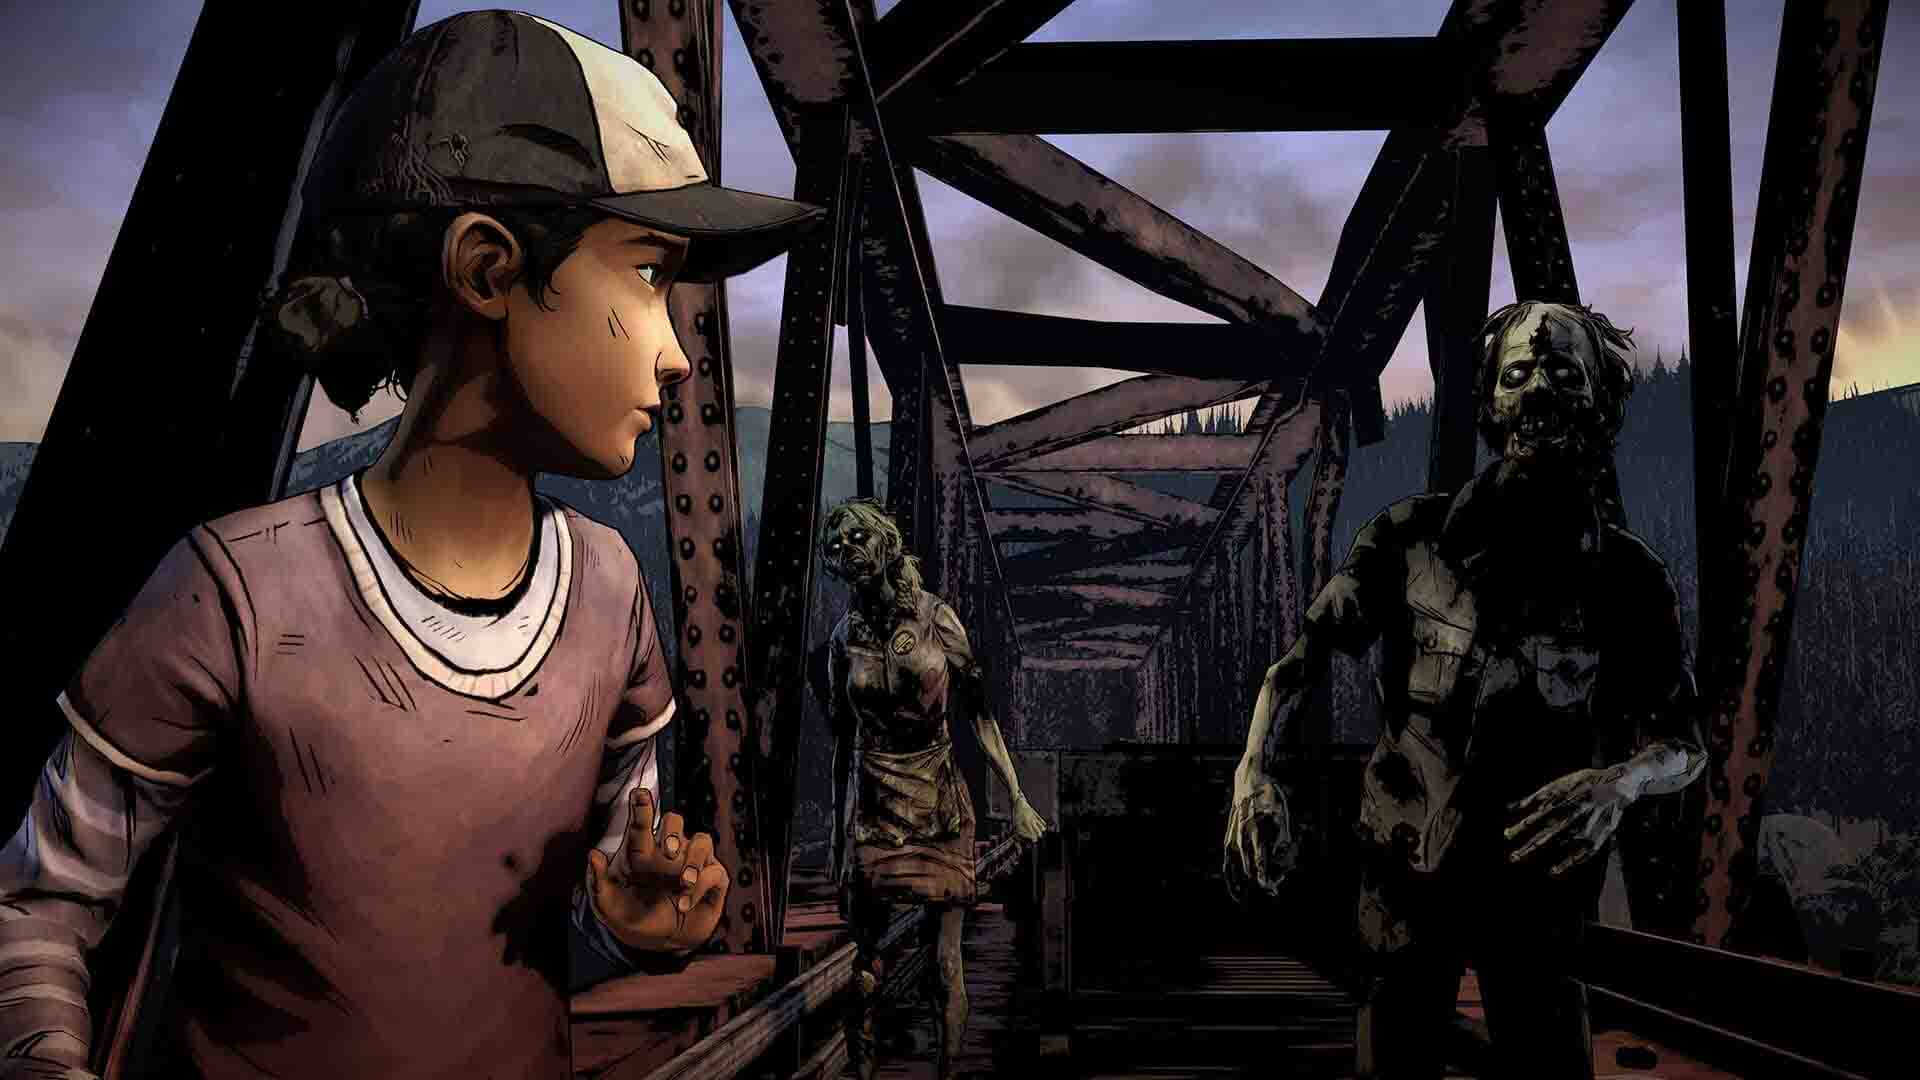 The Walking Dead: The Telltale Definitive Series System Requirements for PC Games minimum, recommended specifications for Windows, CPU, RAM, Storage, and GPU.